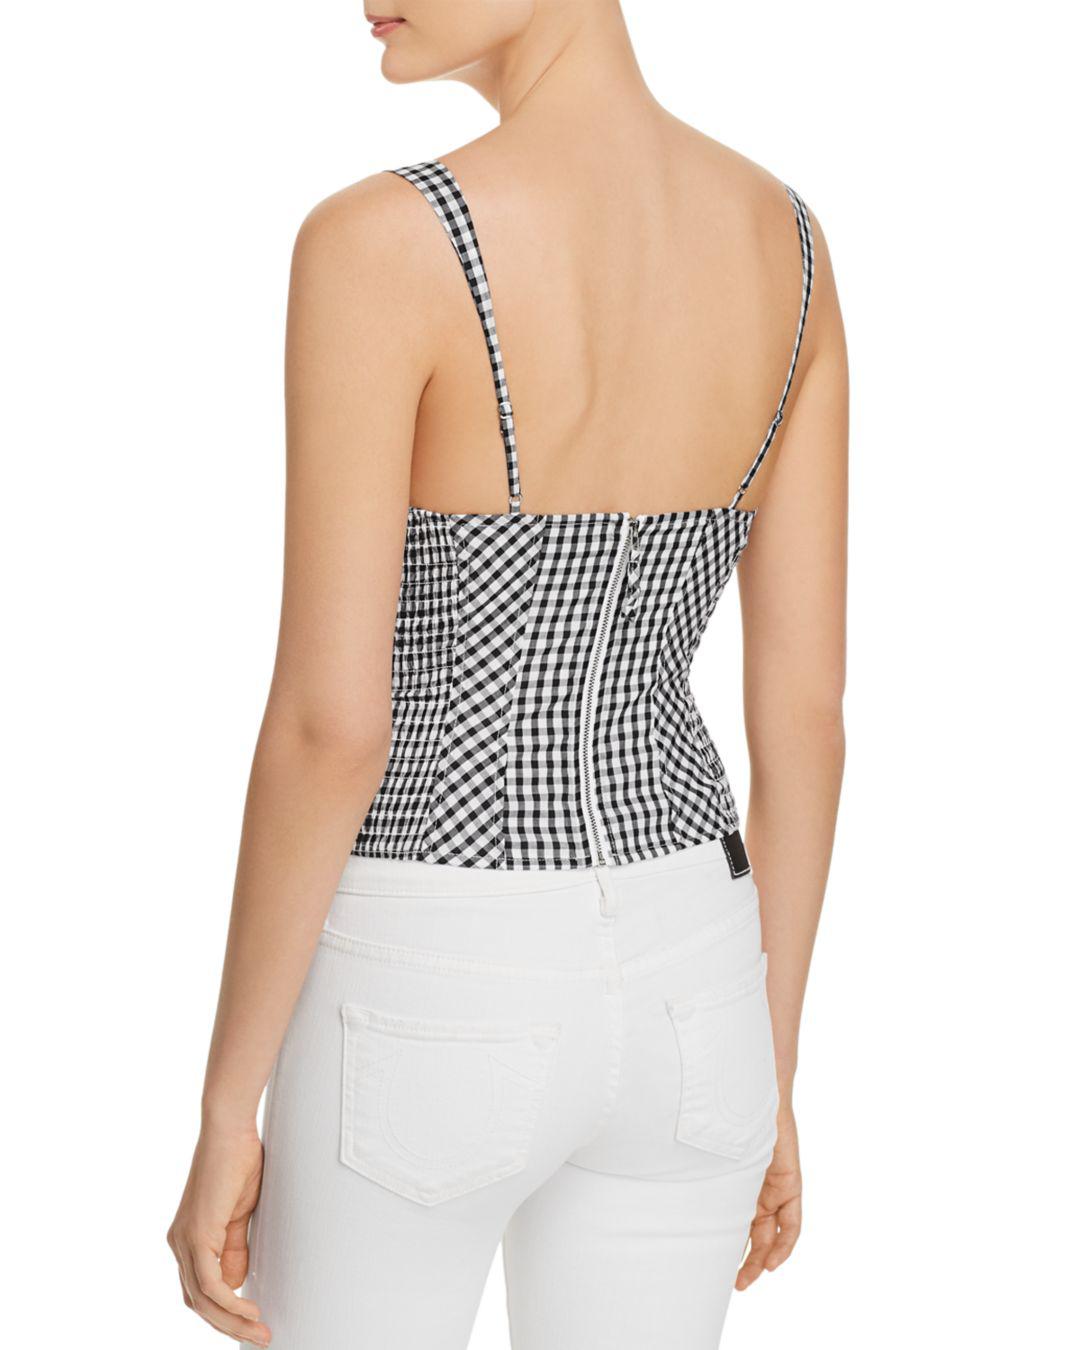 Guess Gingham Bustier Top in Black - Lyst